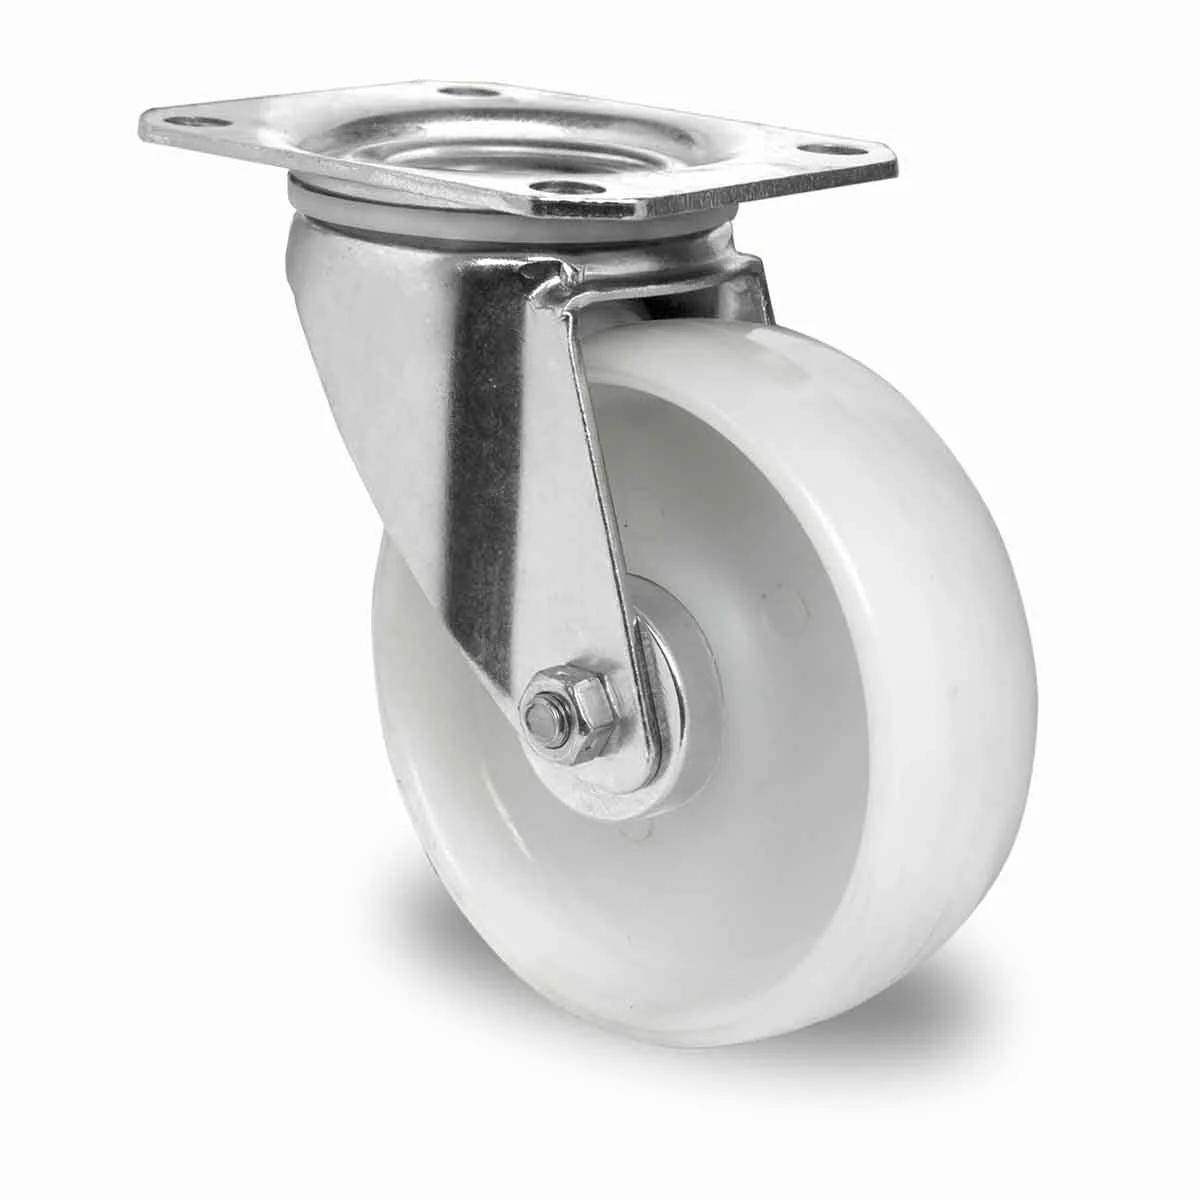 Swivel castor with base plate